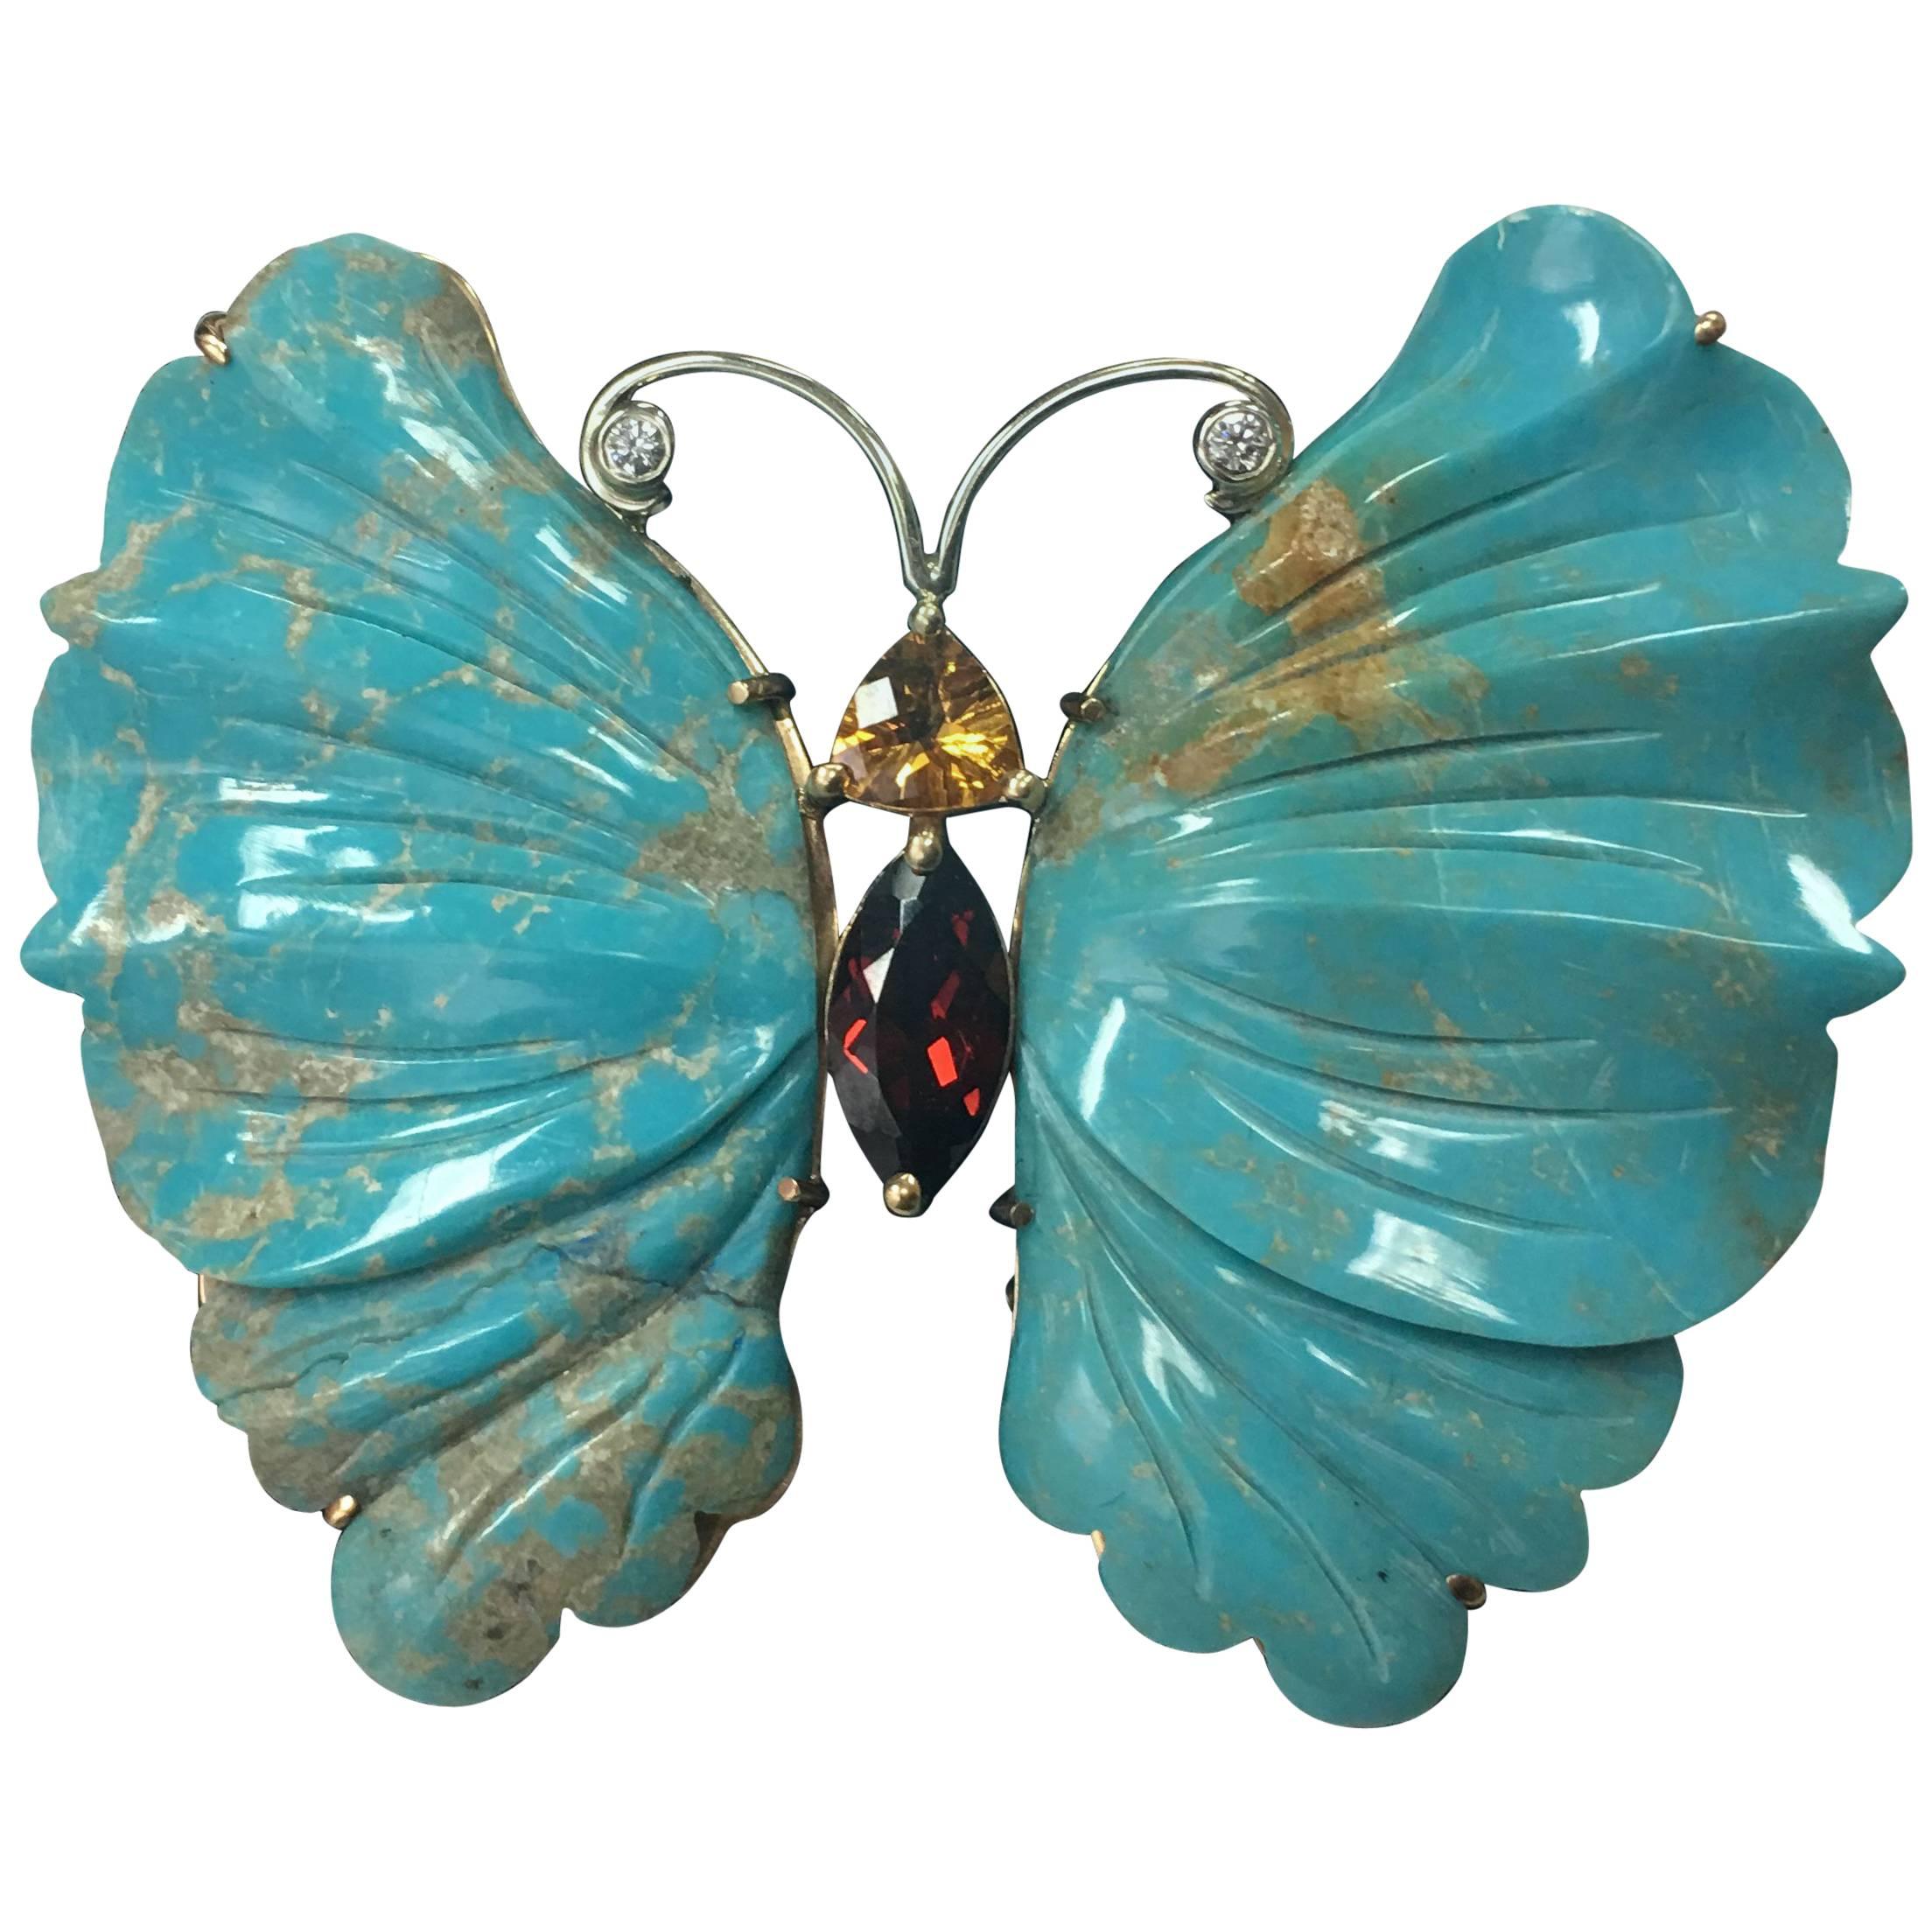 Coach House Beautiful Natural Turquoise Gold Butterfly Brooch Pin Pendant